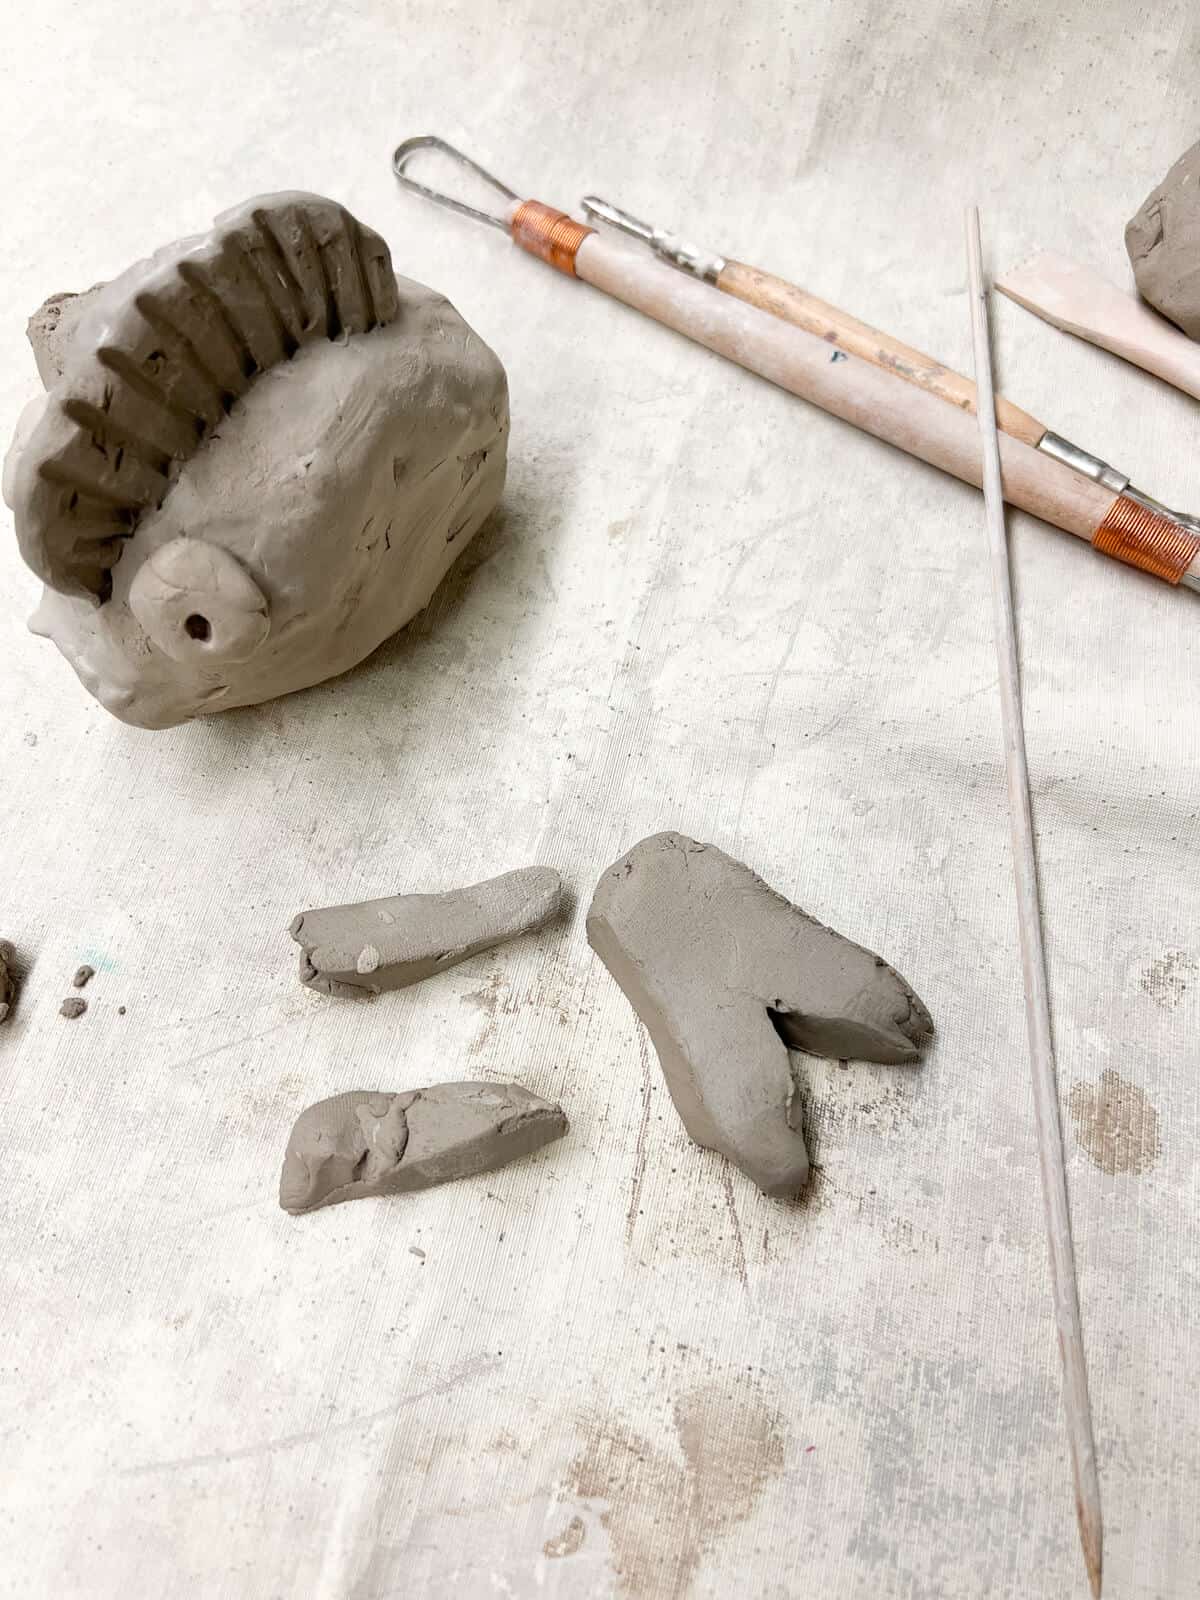 fish parts being made out of clay for kids art project. 